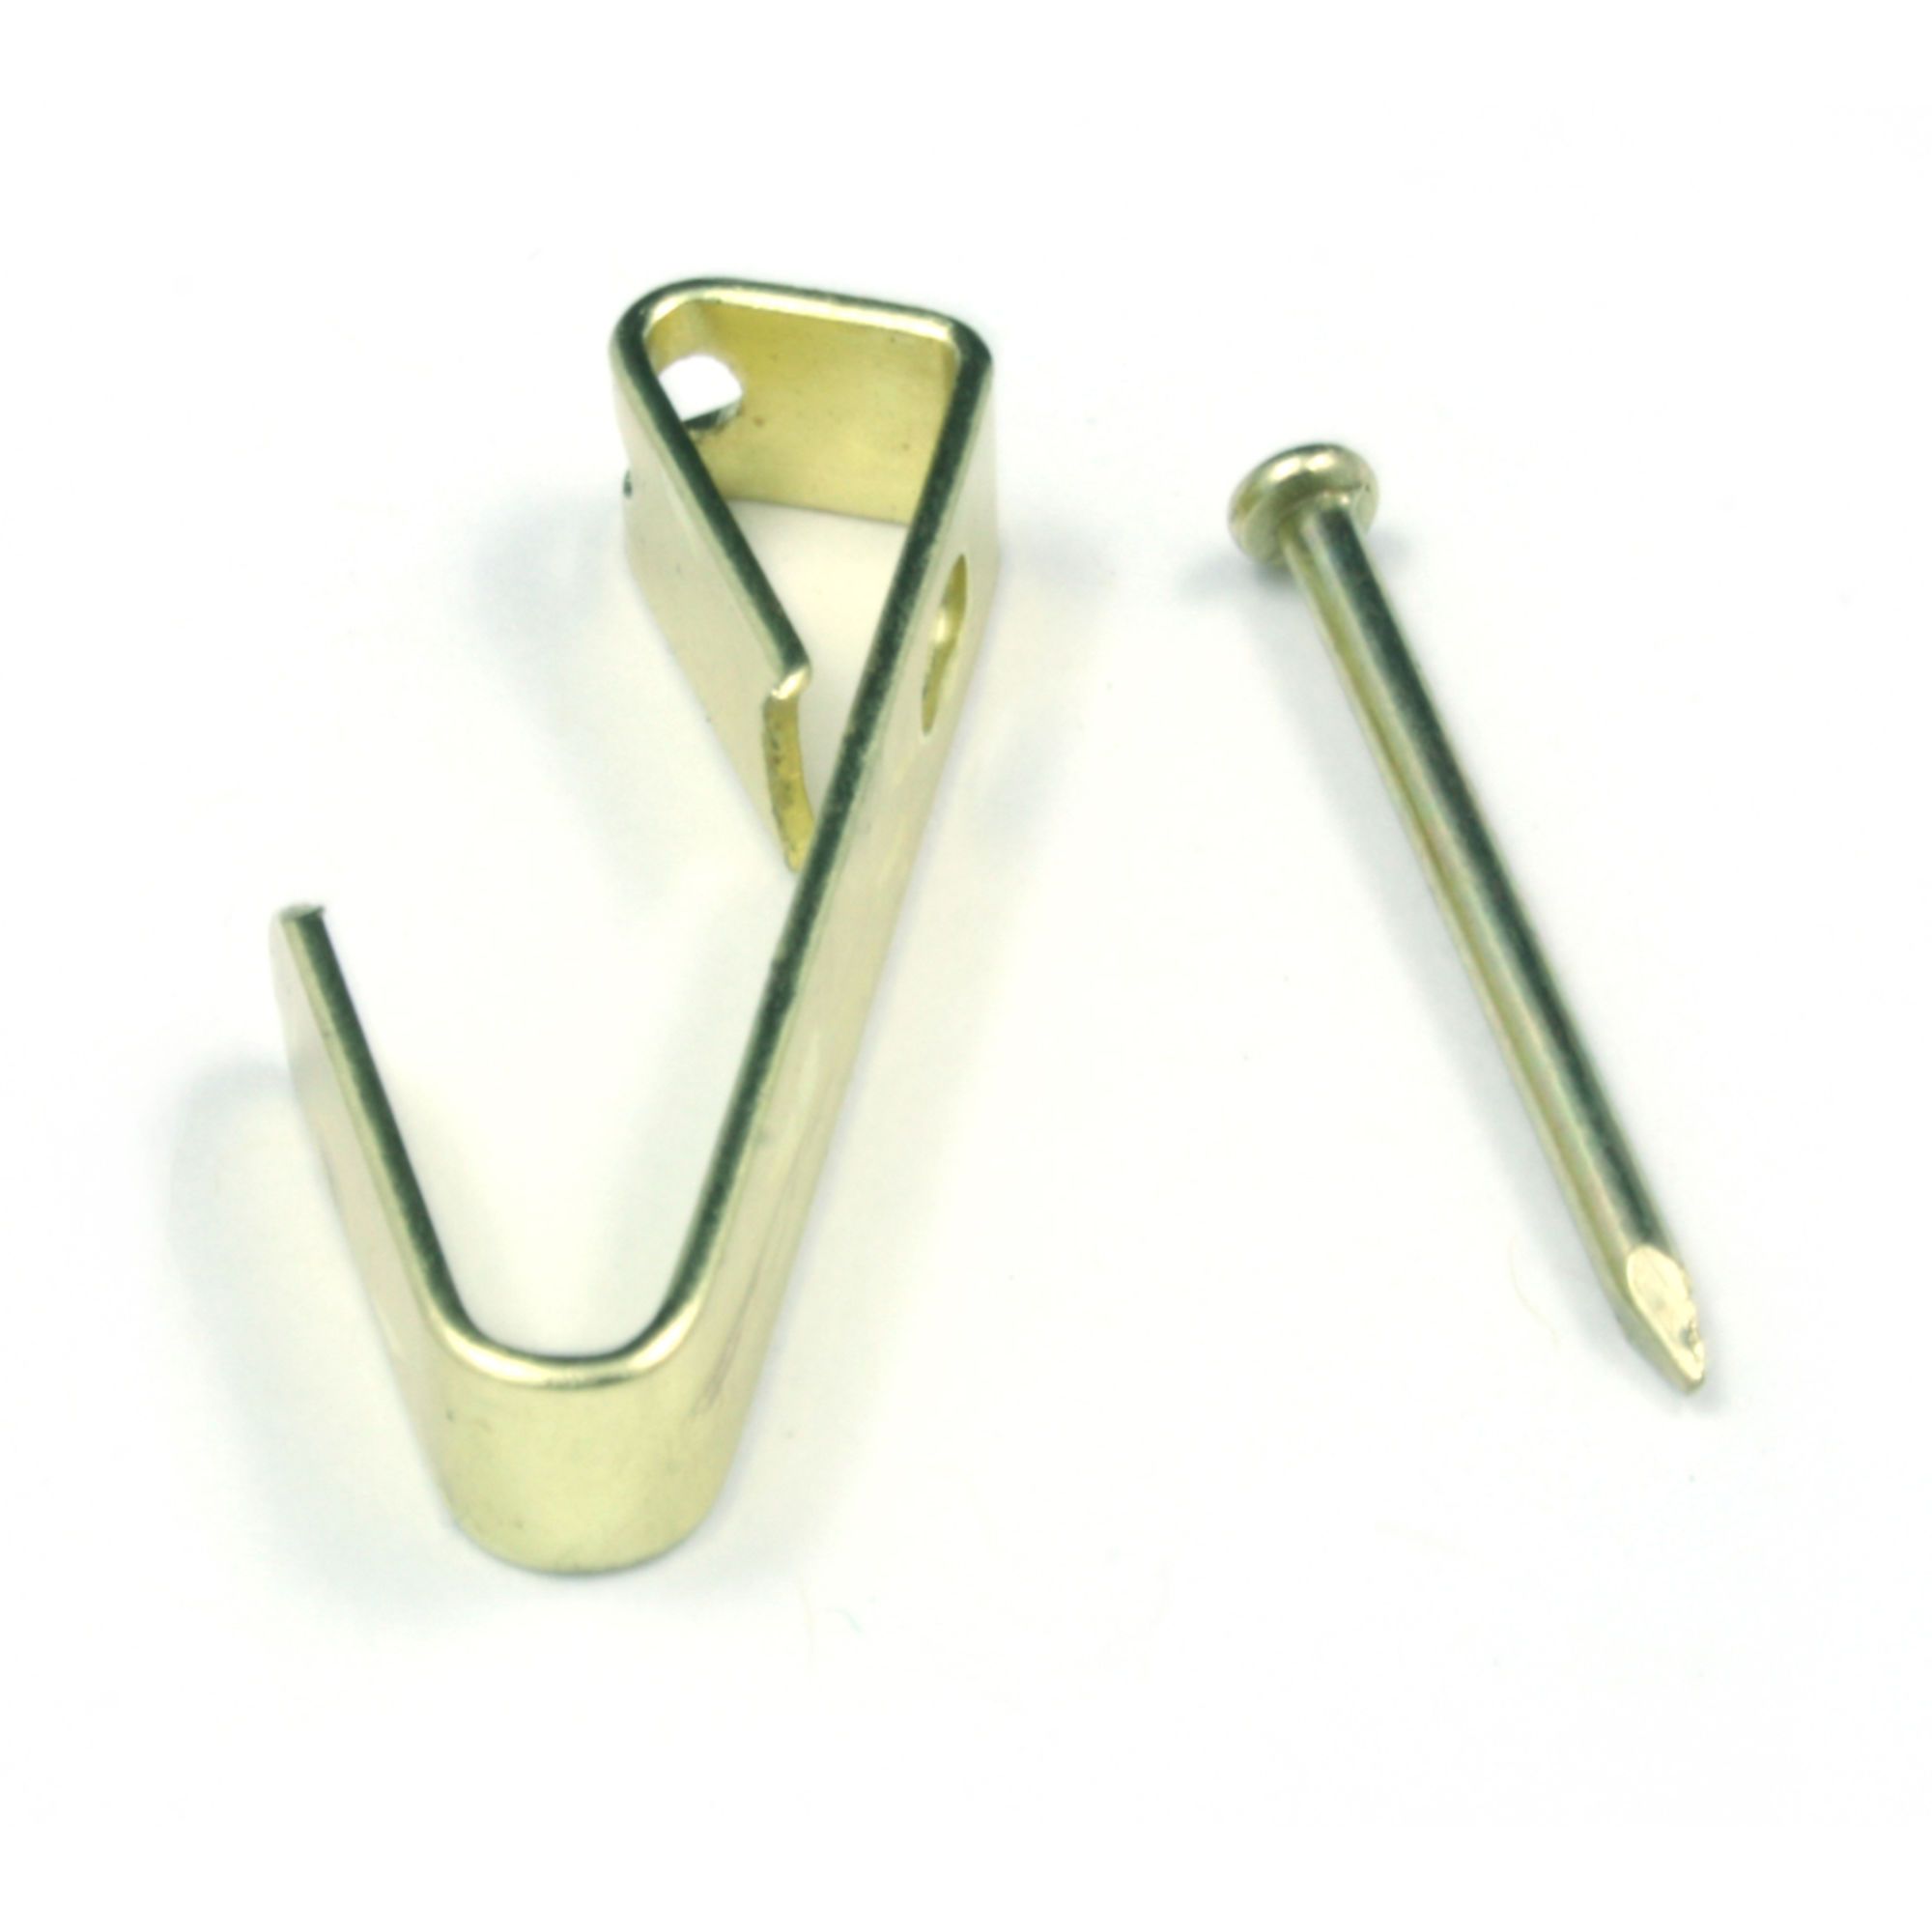 Frame hook with nail - 100 lb. Safe Working Load - 2/Pkg from